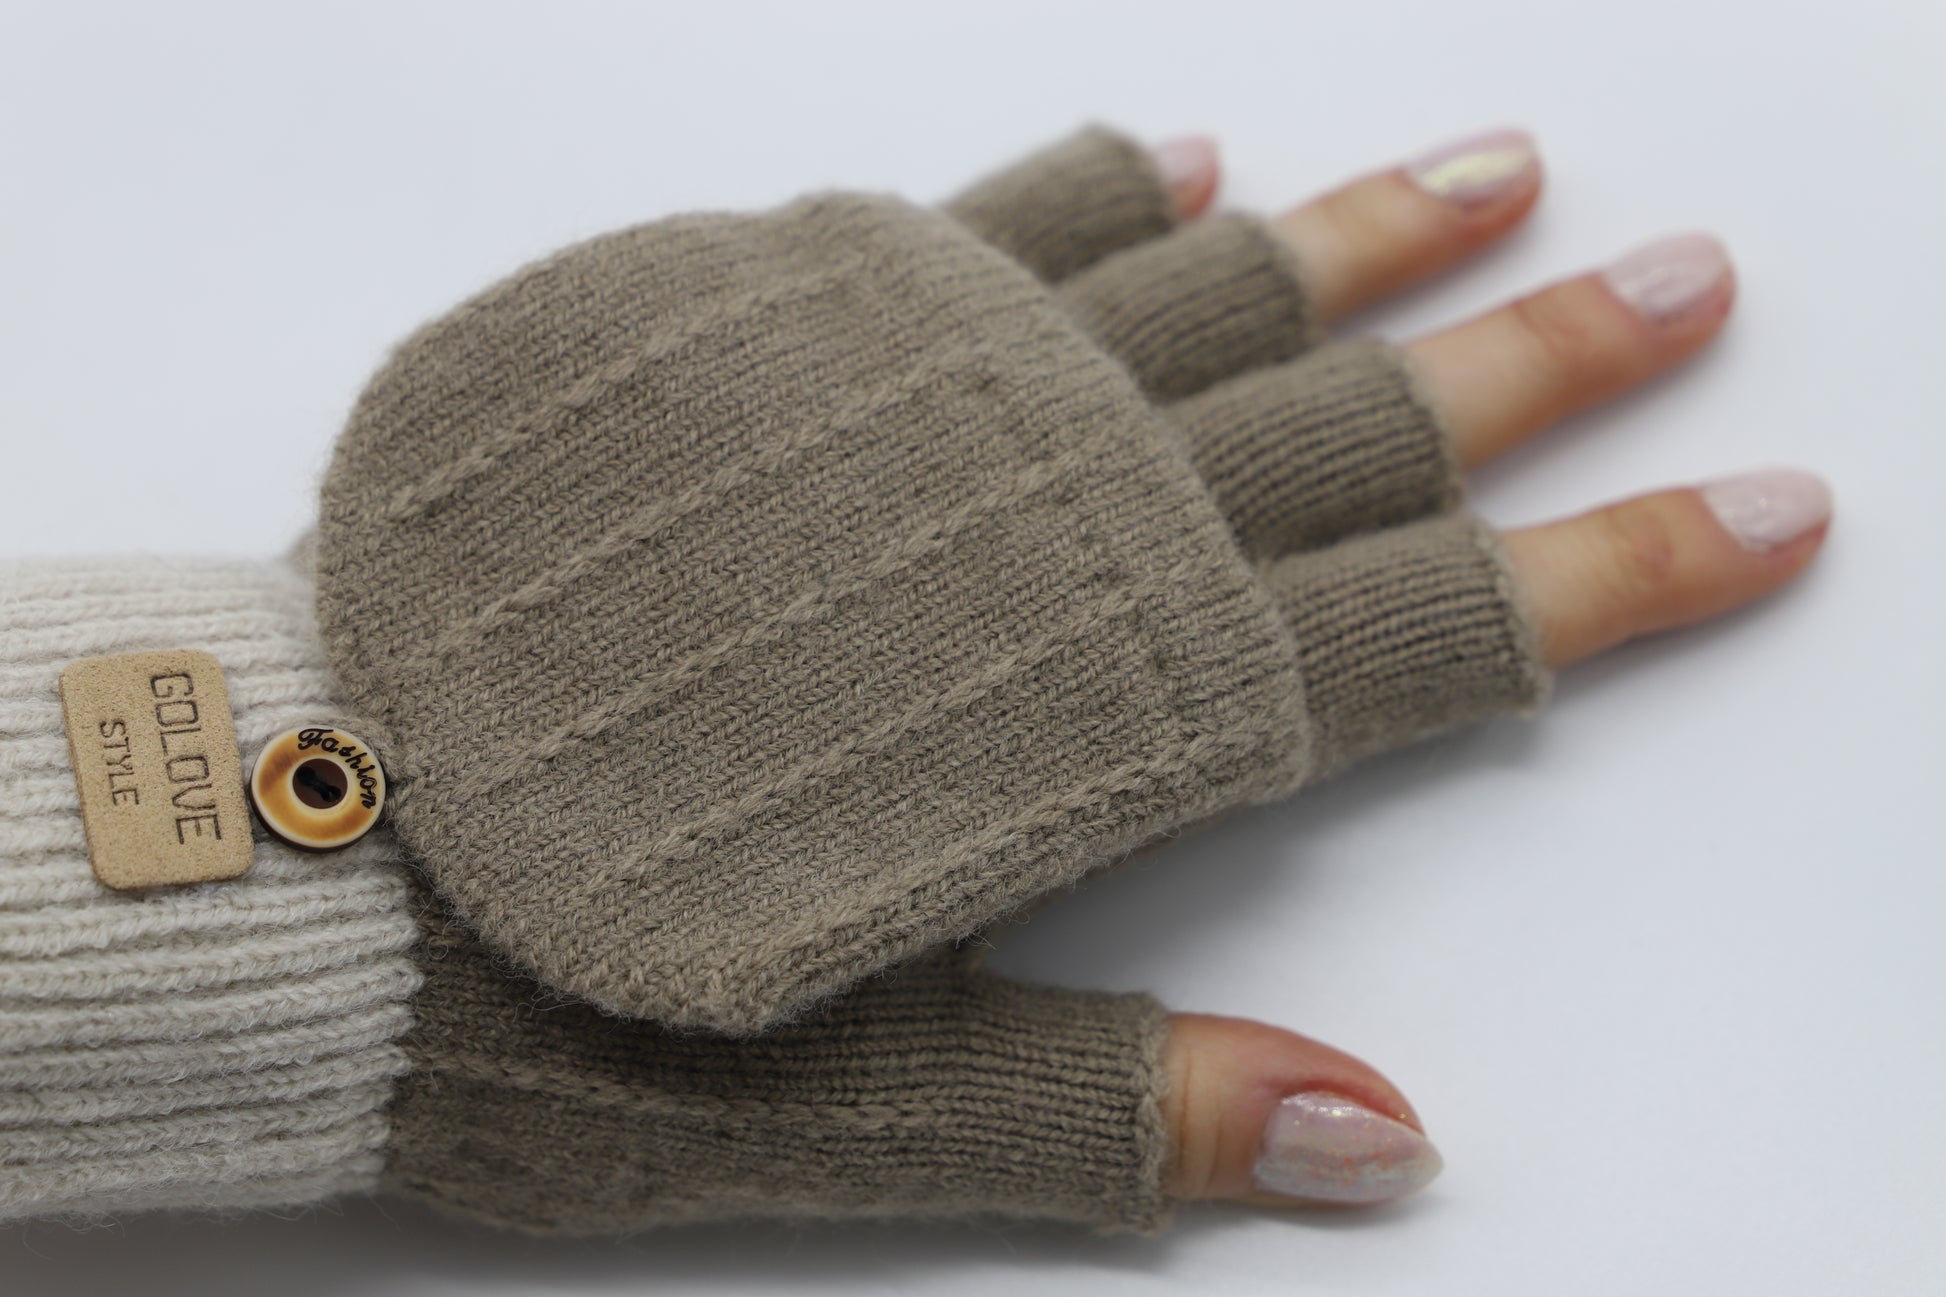 These flip-top gloves are finest gloves from Villanelle in mocha beige. A comfortable and useful accessory for women made from the softest wool blend for extreme comfort and warmth. The opening and closing cover gives you flexibility to grab things easily and the closing cover will keep you warm on cold, winter, autumn, spring days. This product is sourced and manufactured in Poland.